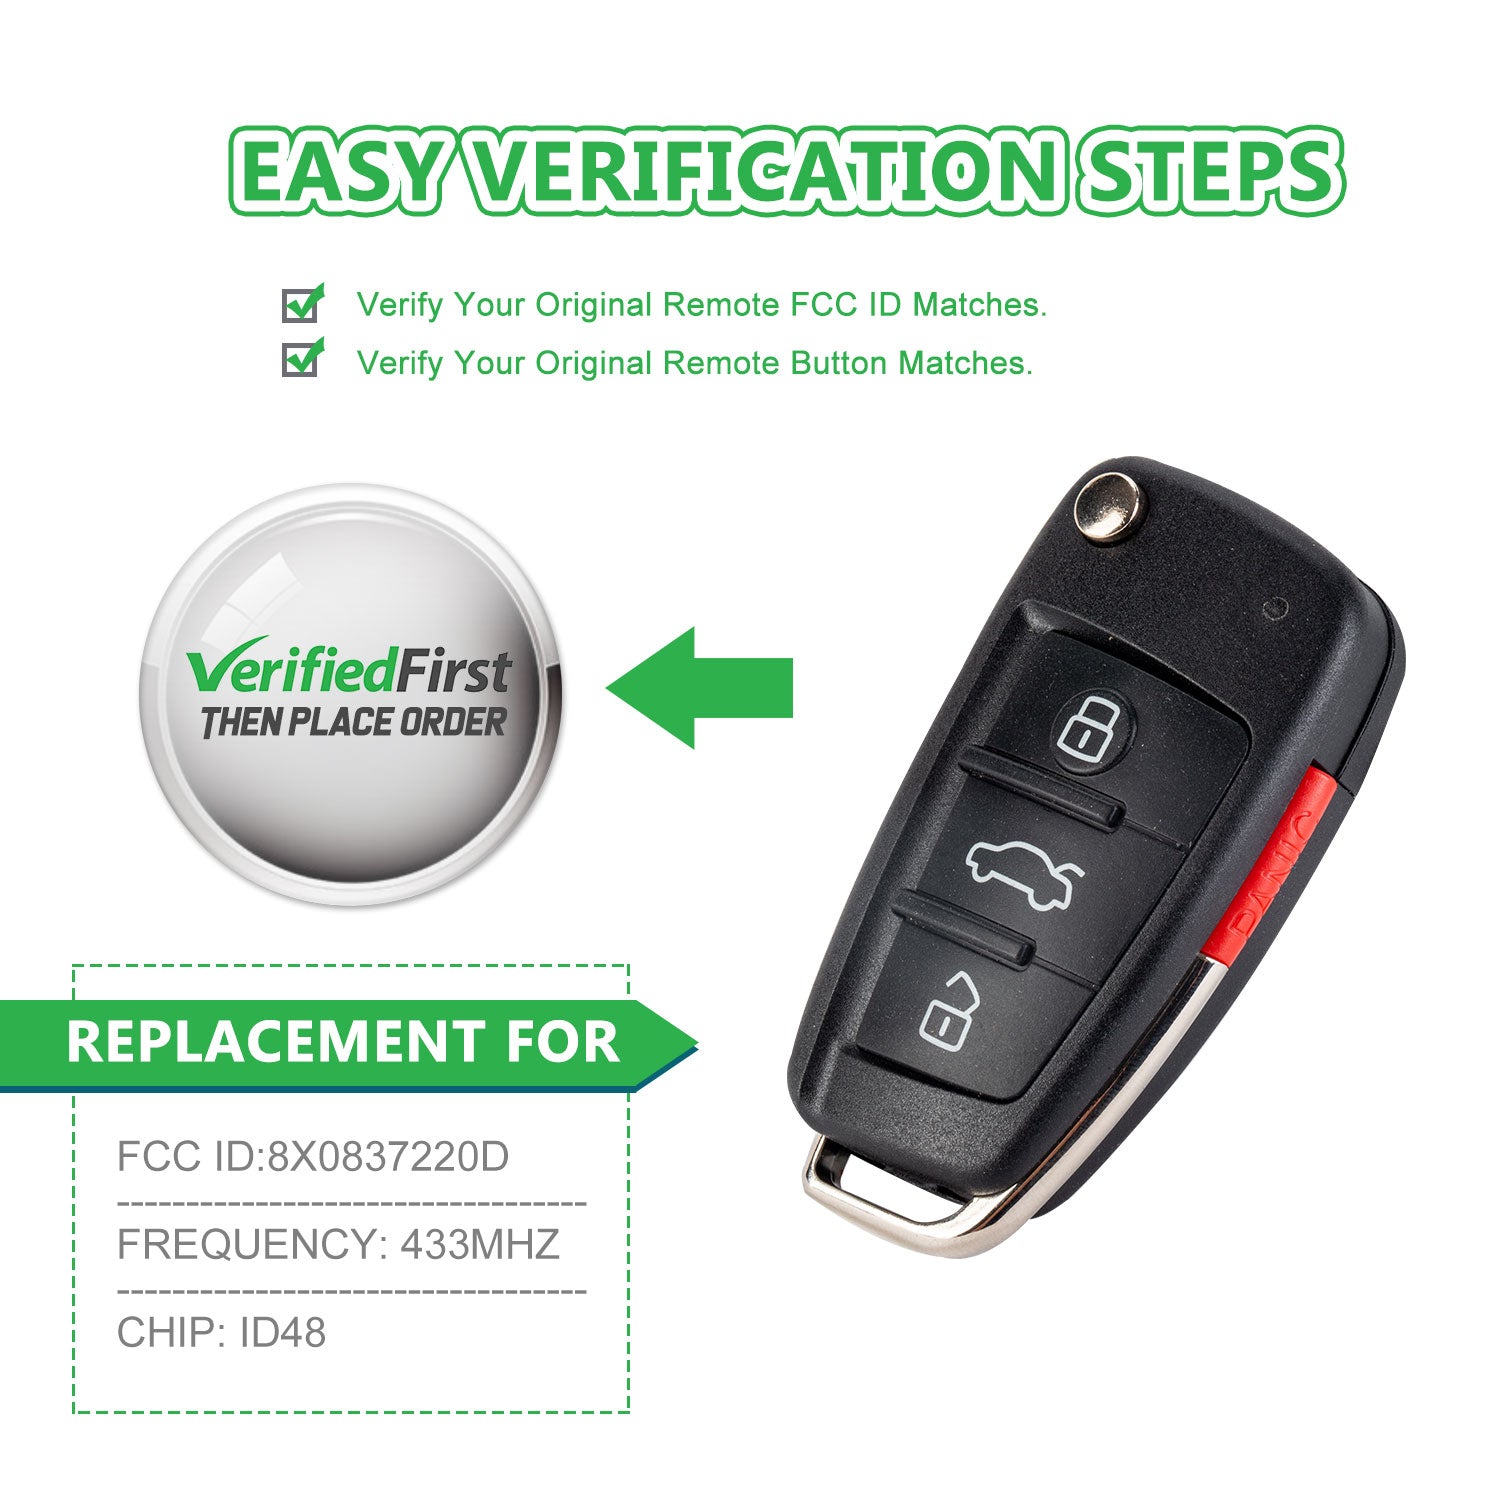 Lots of 10 Extra-Partss Remote Car Key Fob Replacement for Audi 8X0837220D fits 2011 2012 2013 2014 A1 Q3